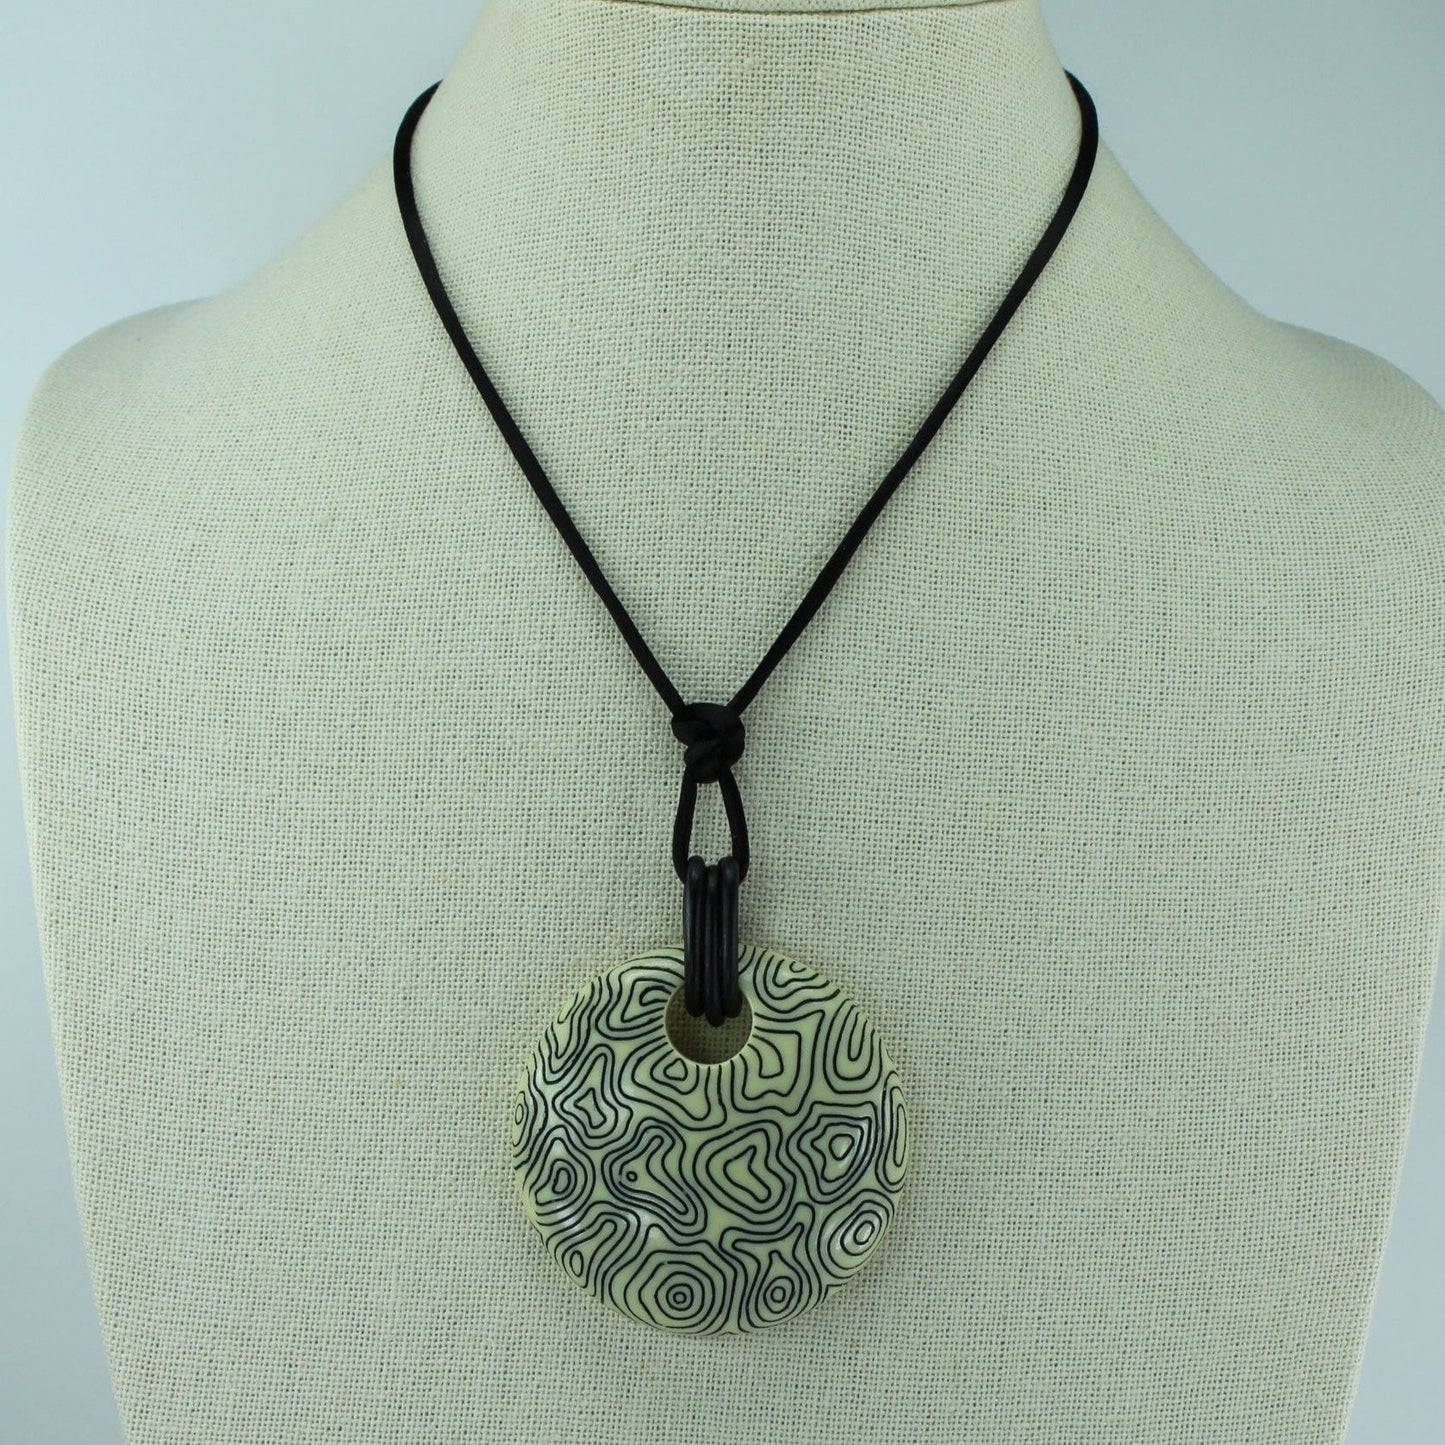 Artisan Etched Pendant Necklace Black and Cream OOAK